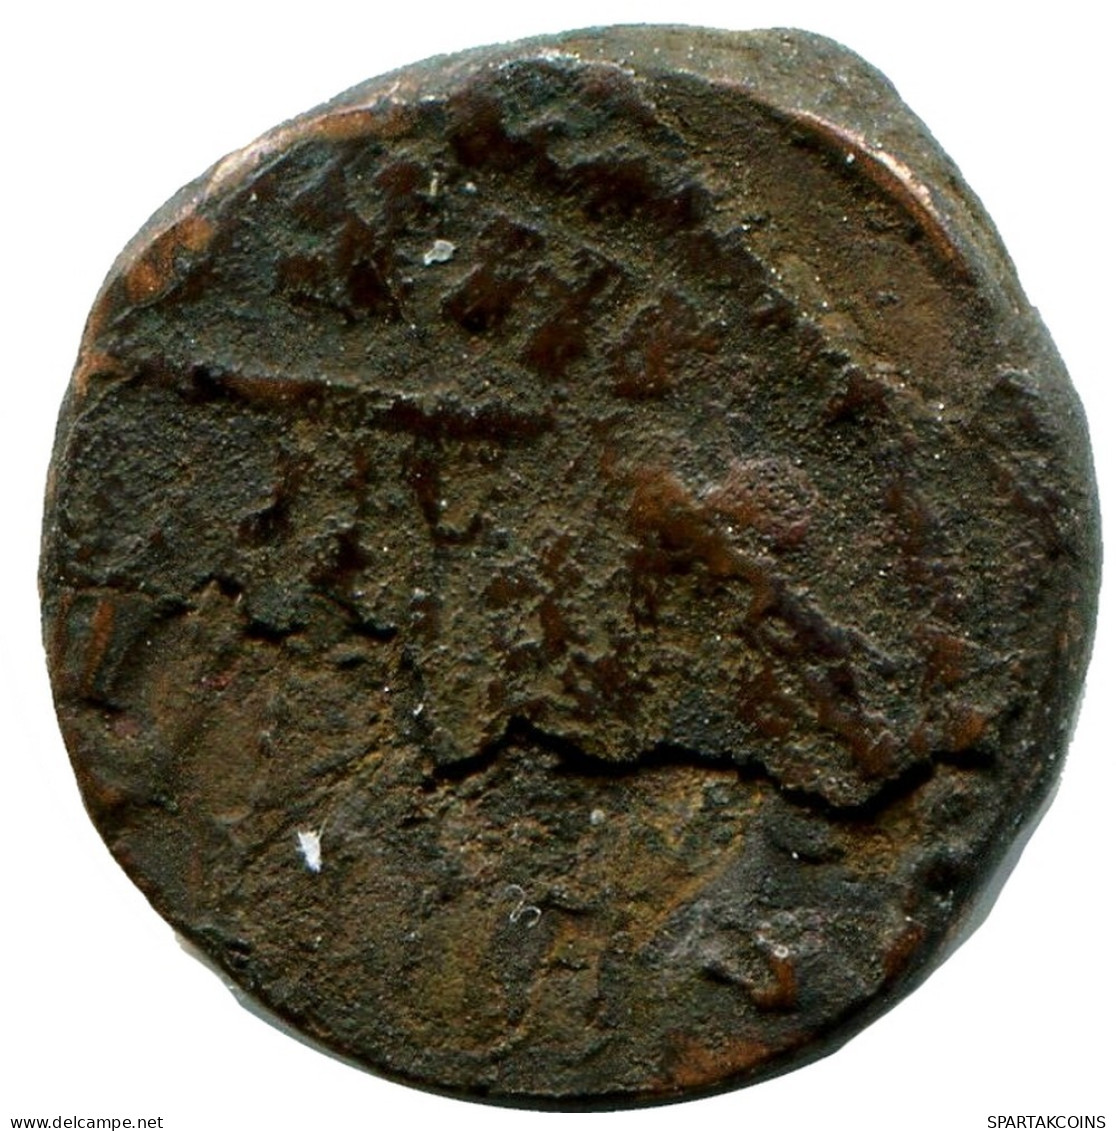 ROMAN Pièce MINTED IN CYZICUS FOUND IN IHNASYAH HOARD EGYPT #ANC11045.14.F.A - El Impero Christiano (307 / 363)